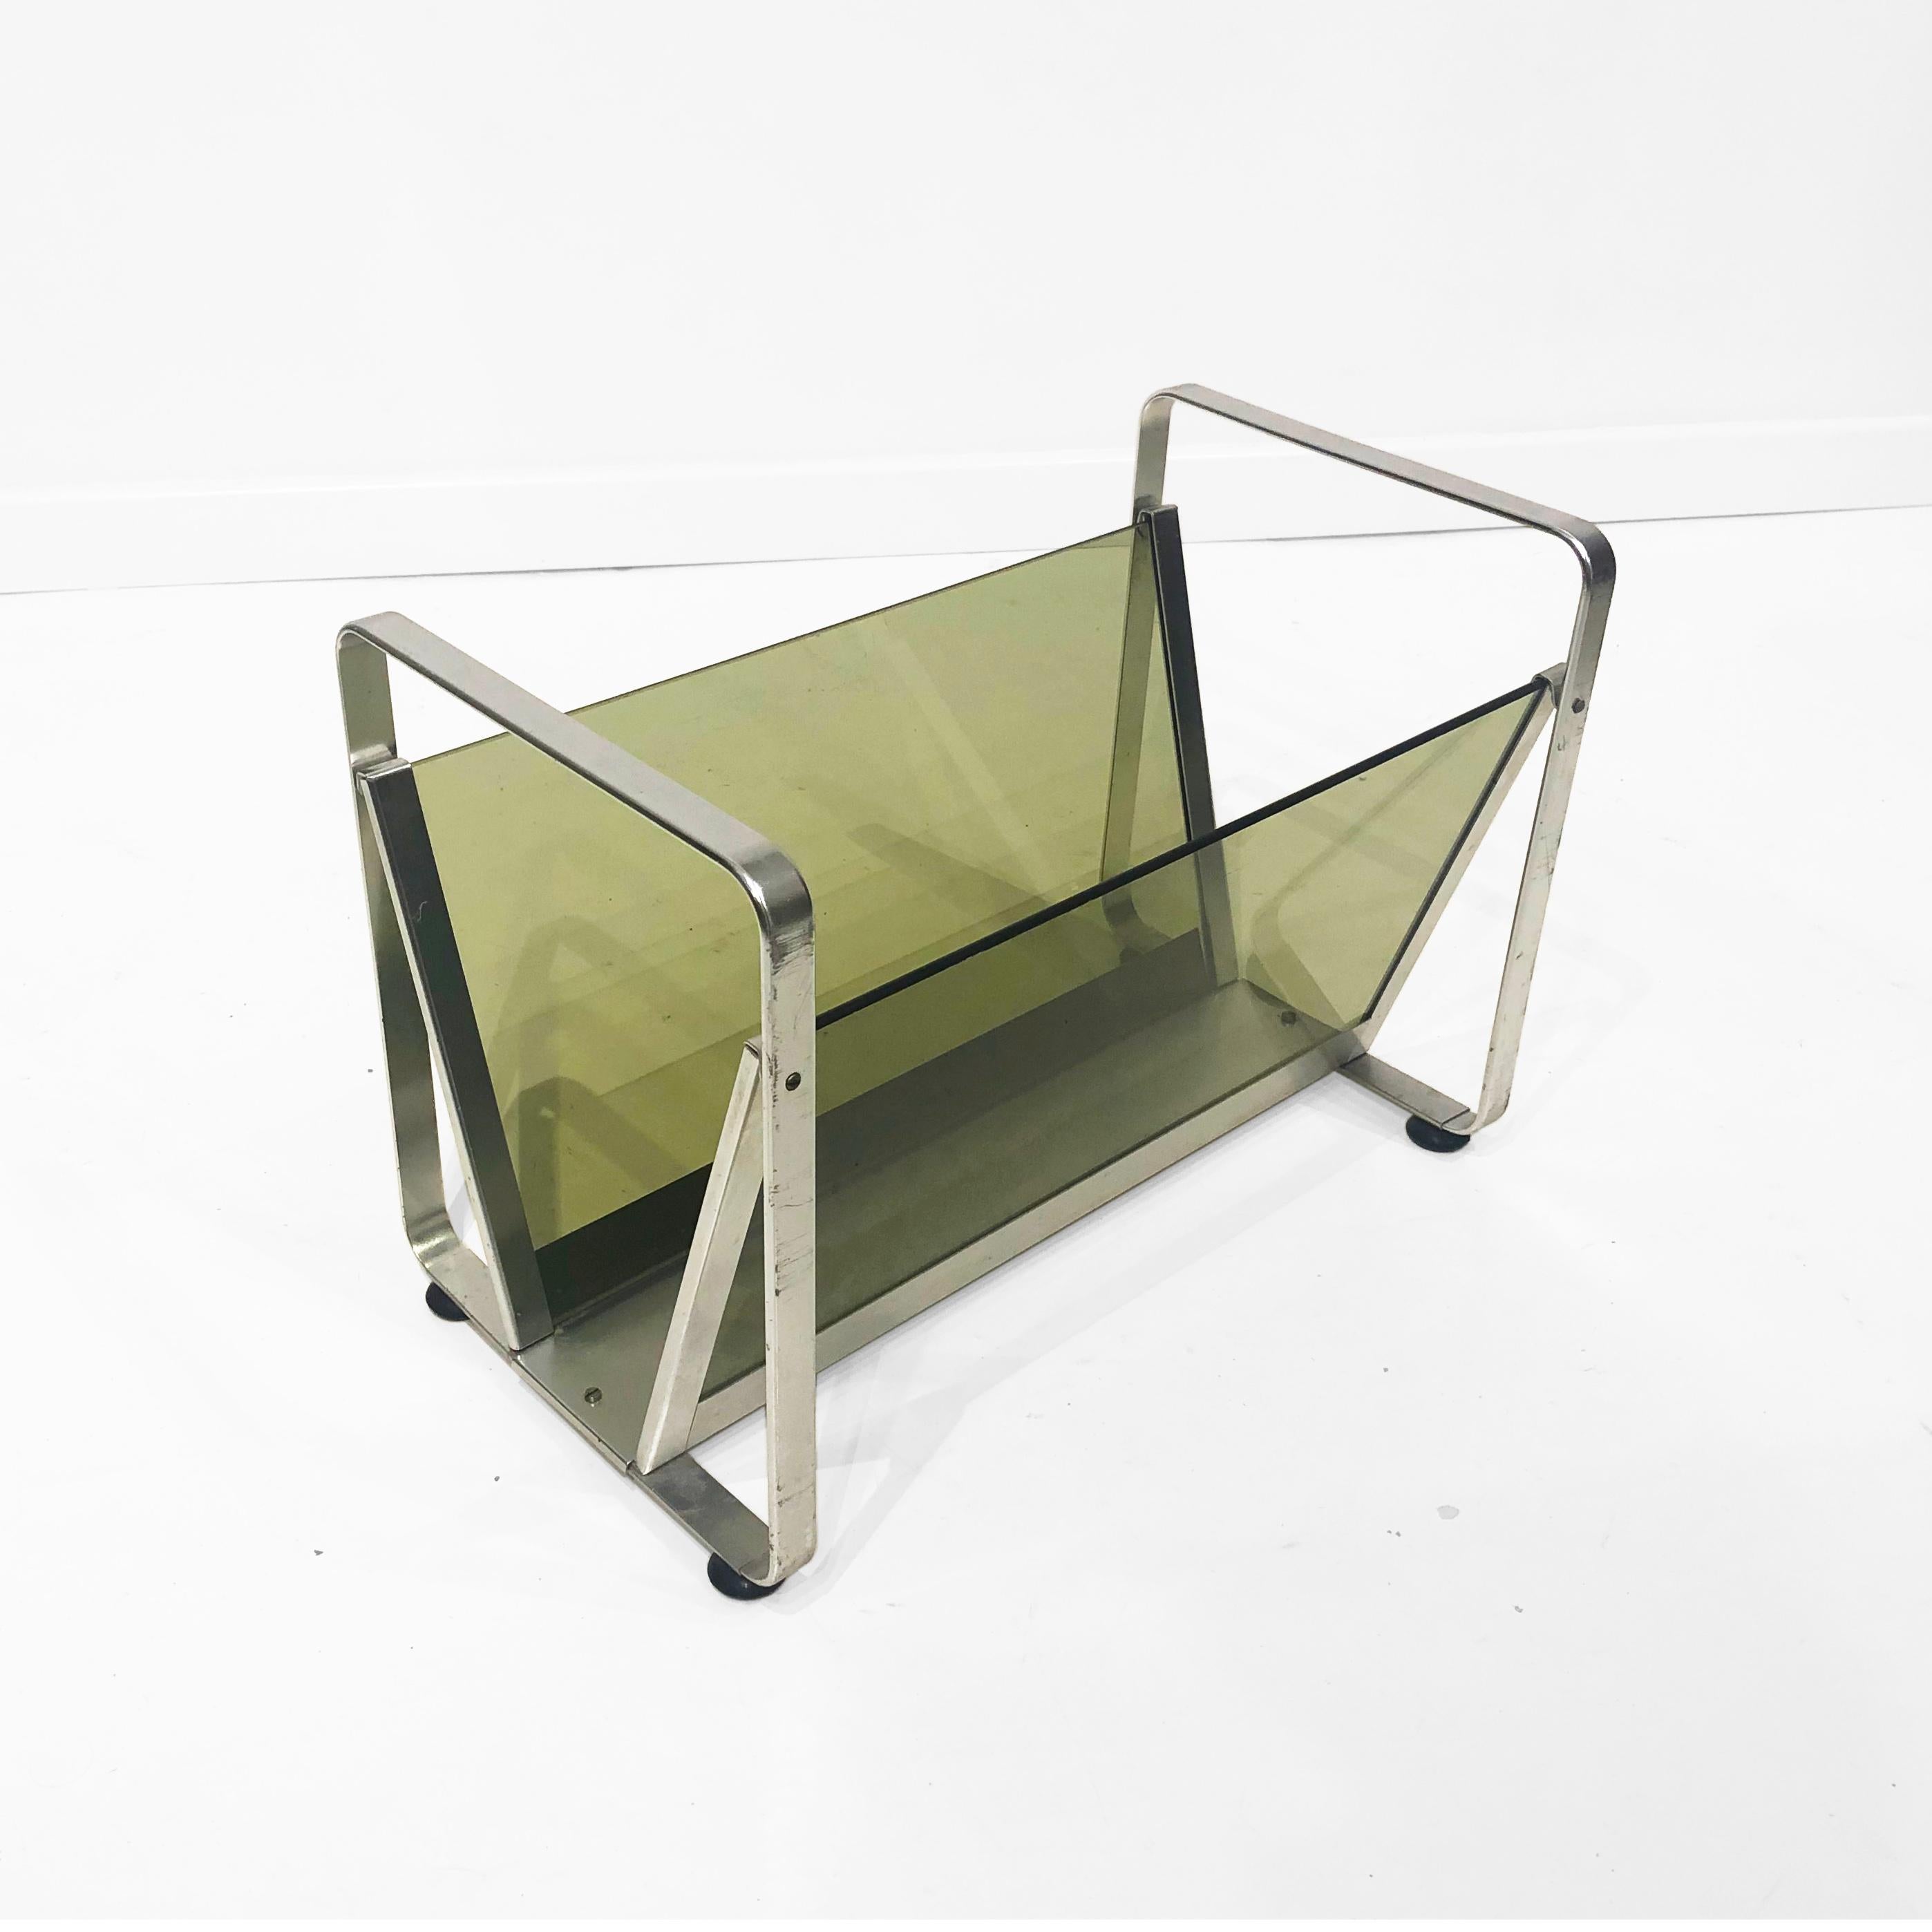 Space Age magazine or vinyl records rack in silver aluminium metal bended frame and smoked green glass. Light weight and easy to take around. AV Handwerk manufacturer's sticker is on the drinks cart.